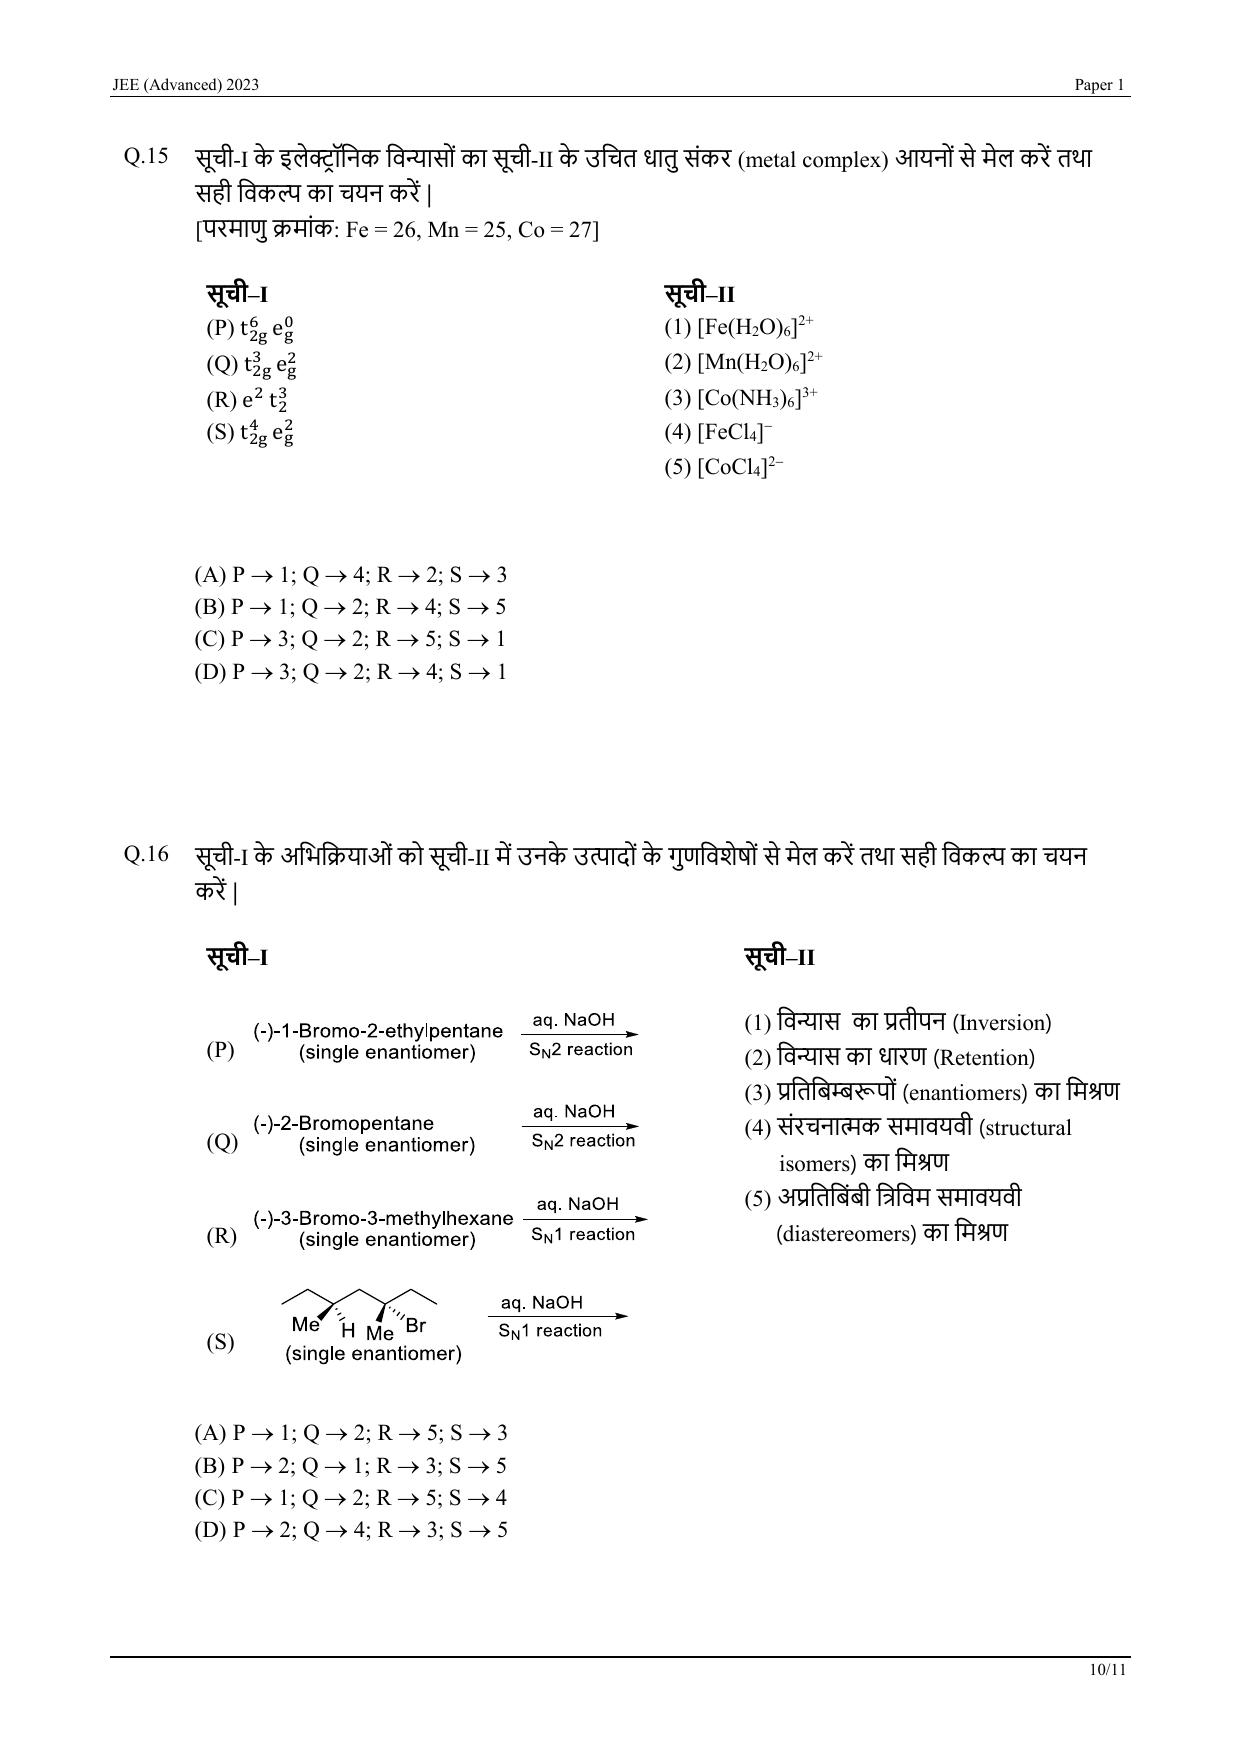 JEE Advanced 2023 Question Paper 1 (Hindi) - Page 30